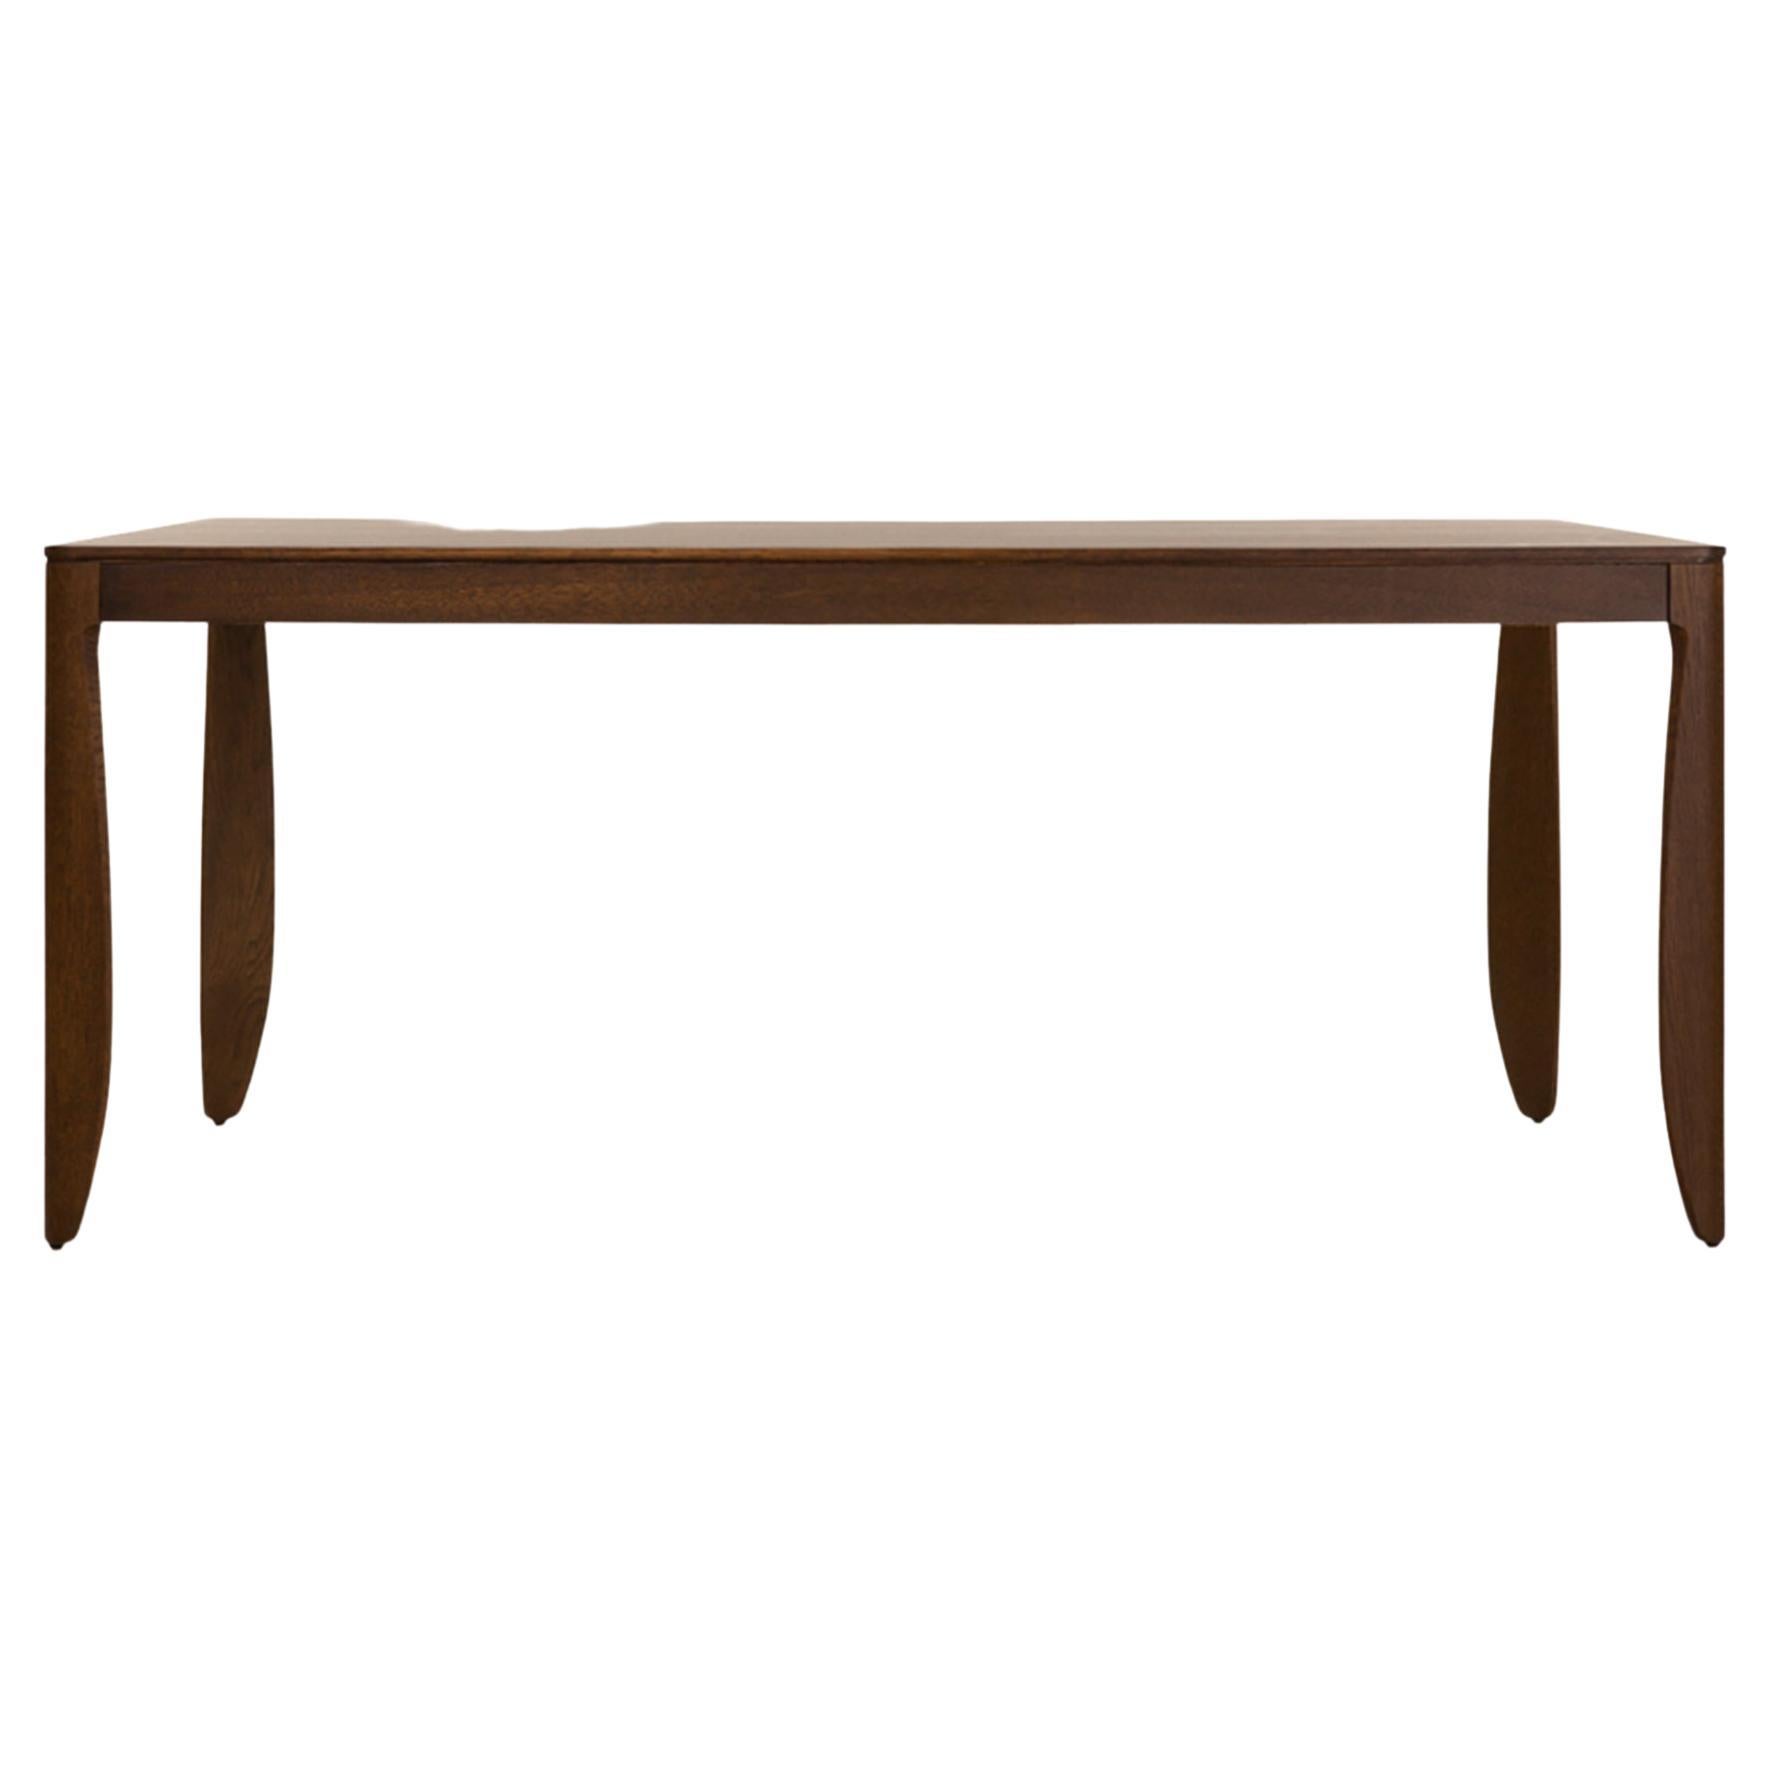 Moooi Monster Small Table Cinnamon Stained Oak by Marcel Wanders Studio For Sale